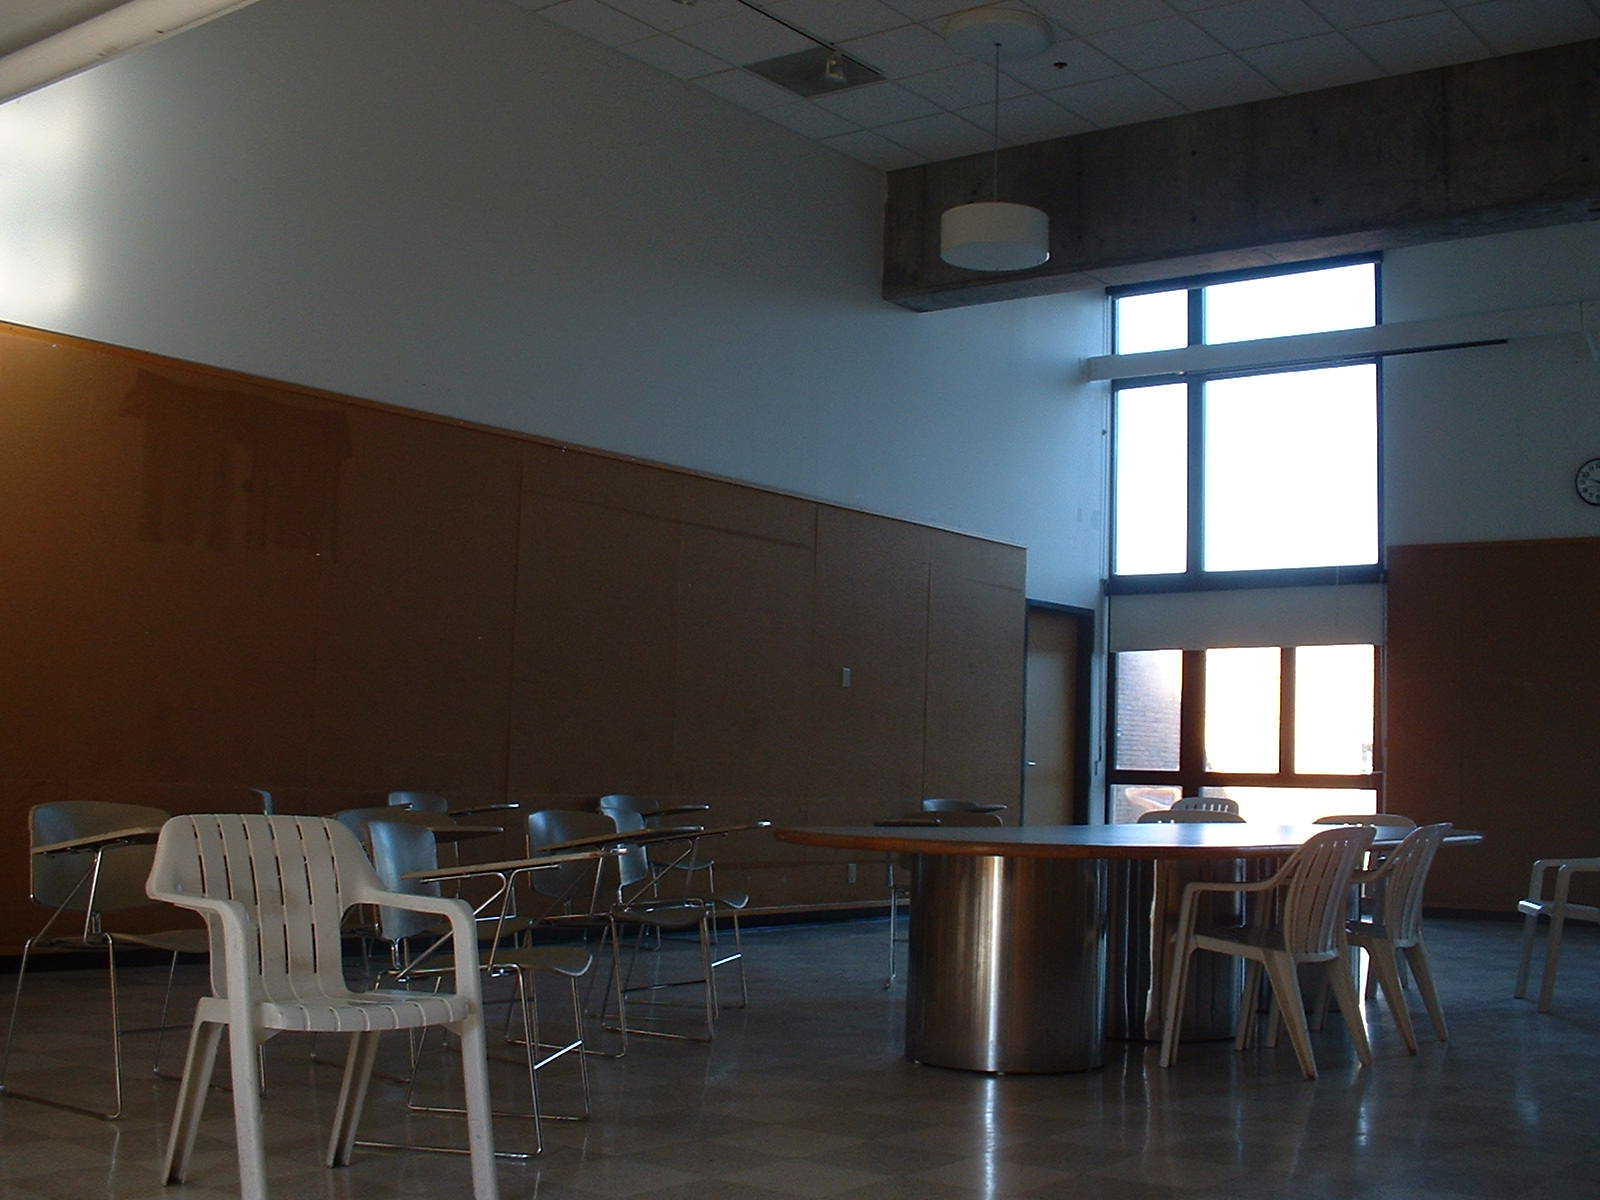 classroom with hard surfaces and resonant acoustics